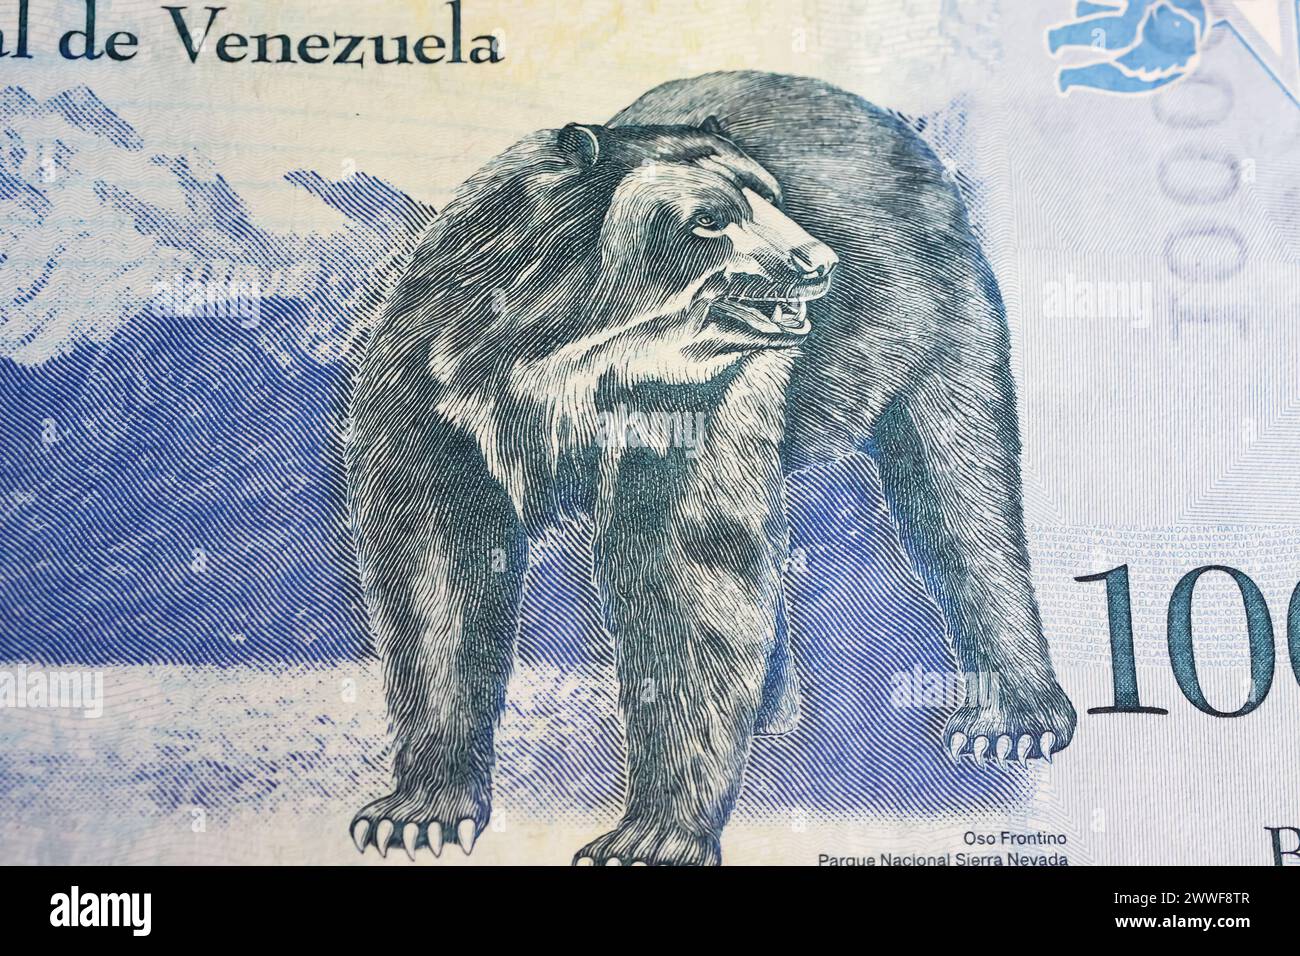 Portrait of south american andean Spectacled bear (Tremarctos ornatos) on Venezuela Bolivar currency banknote (focus on center) Stock Photo